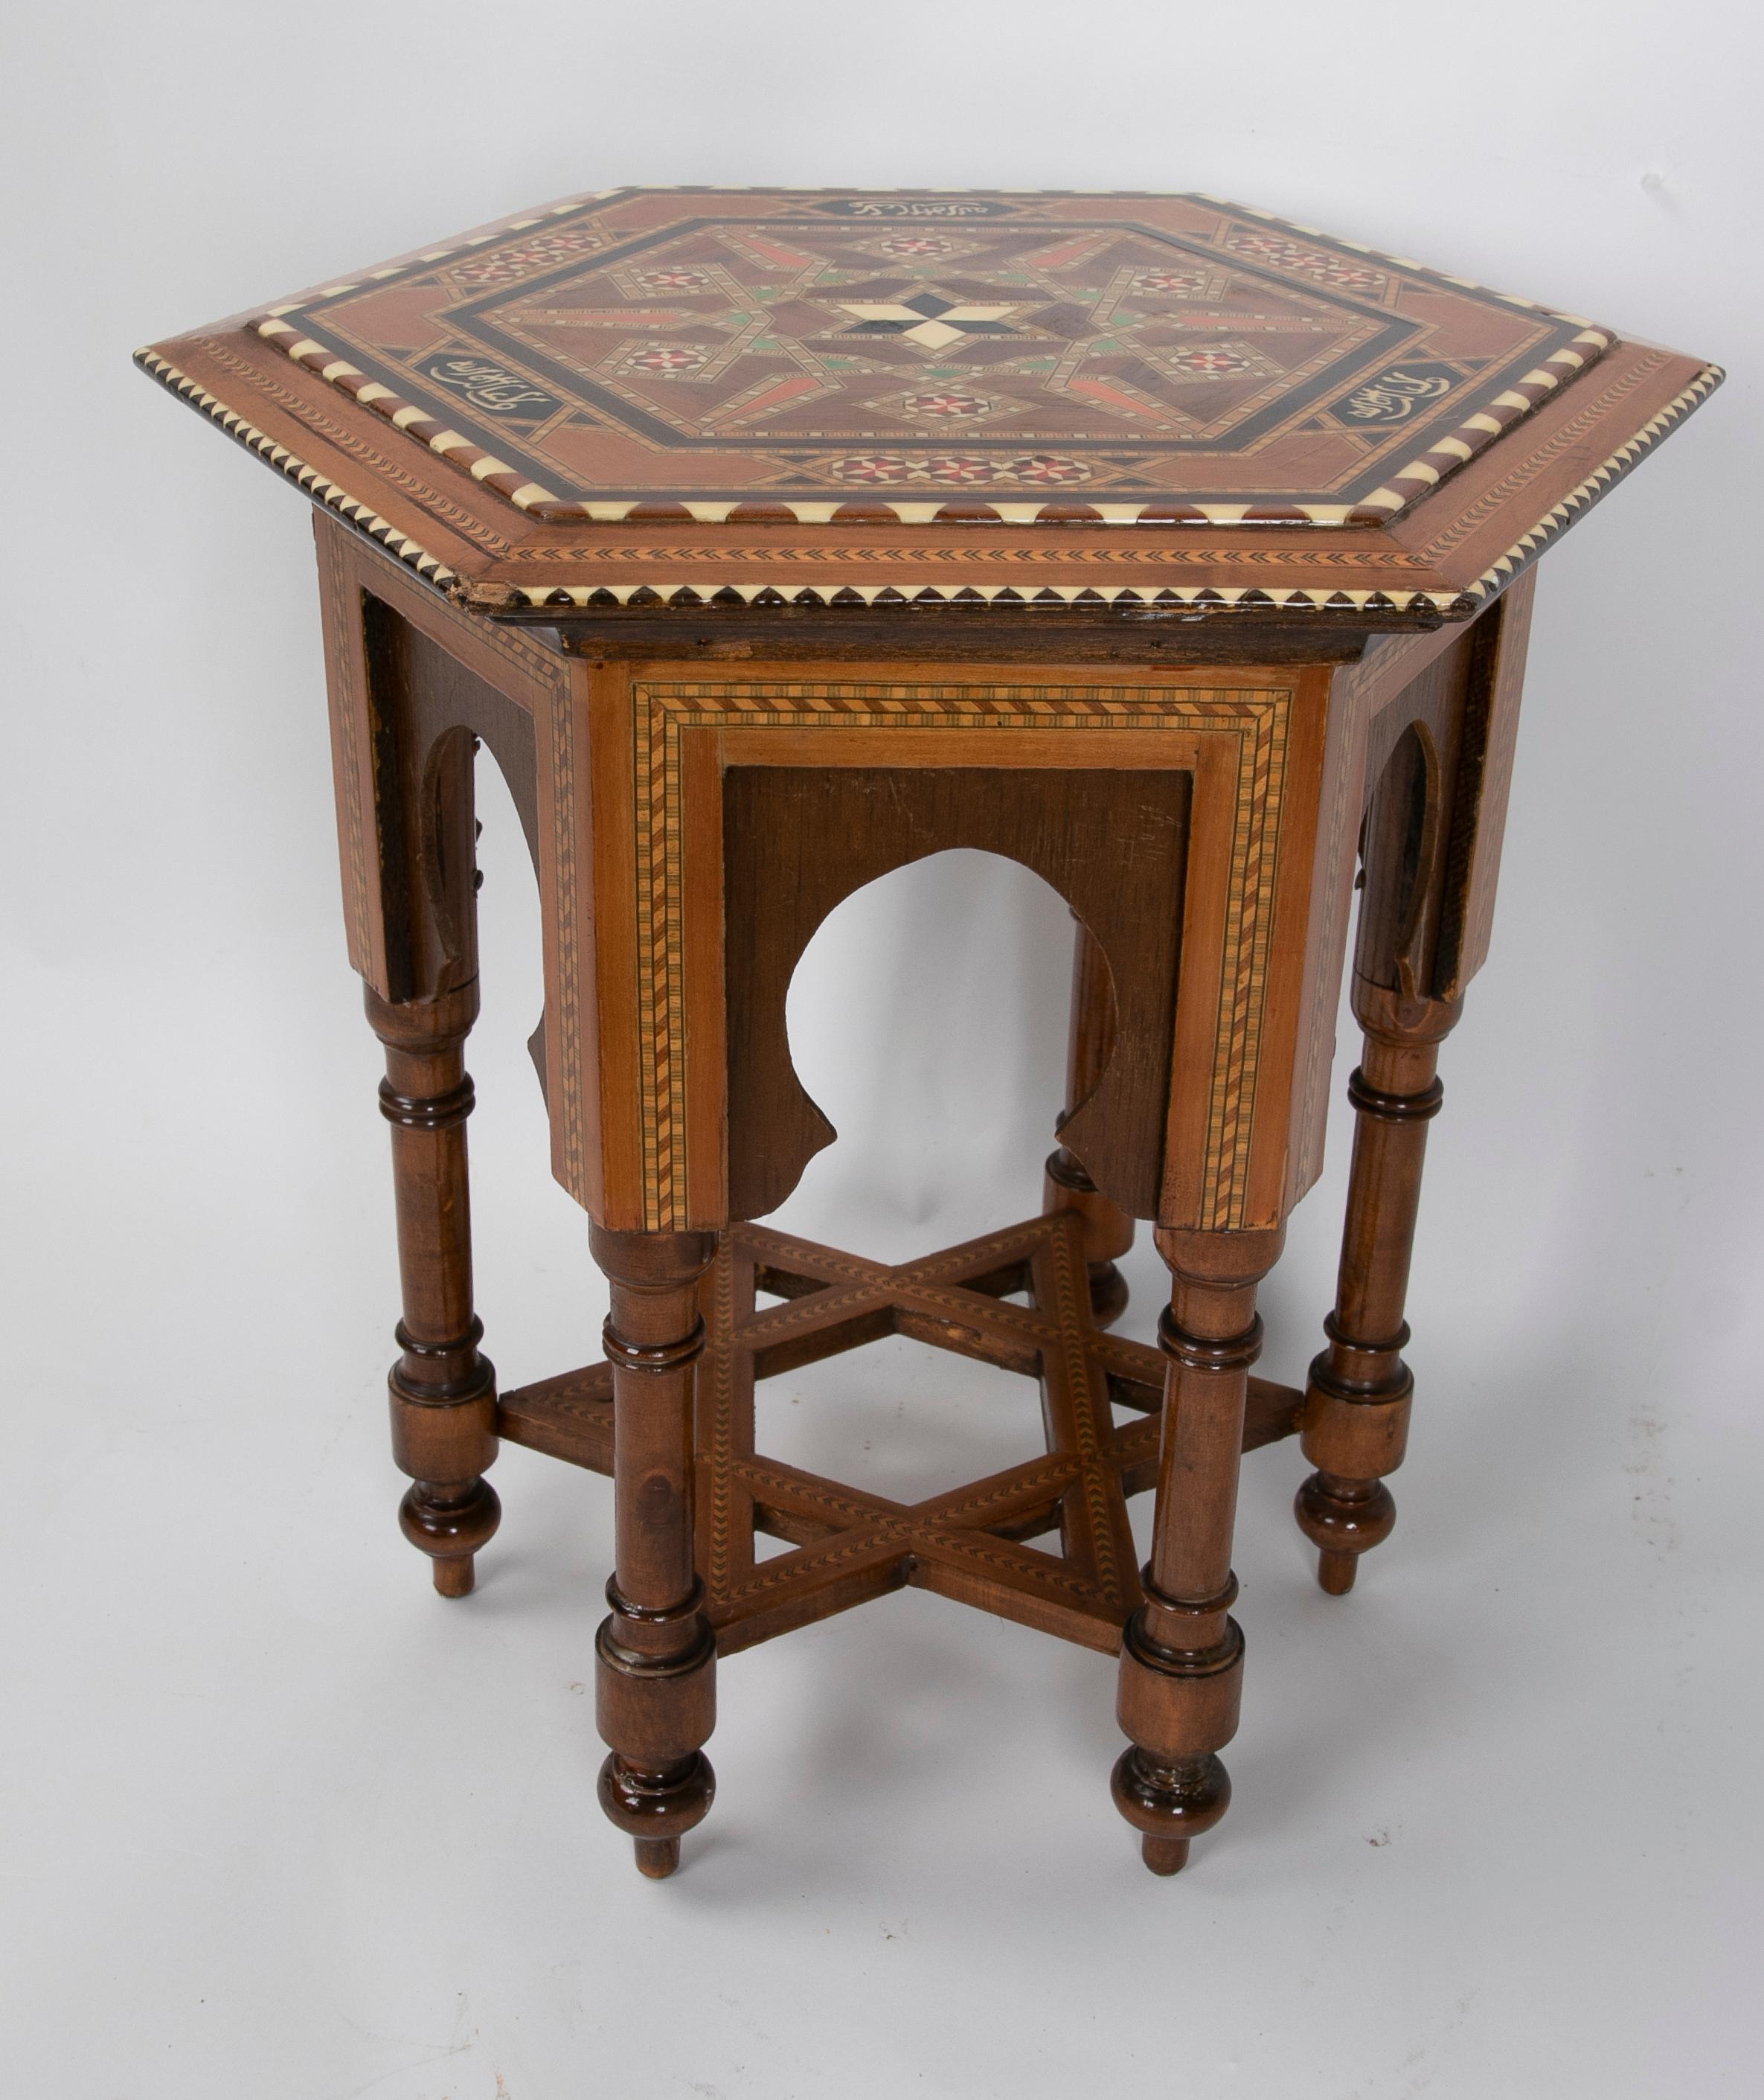 Moroccan Wooden Side Table with Arabic Style Inlays